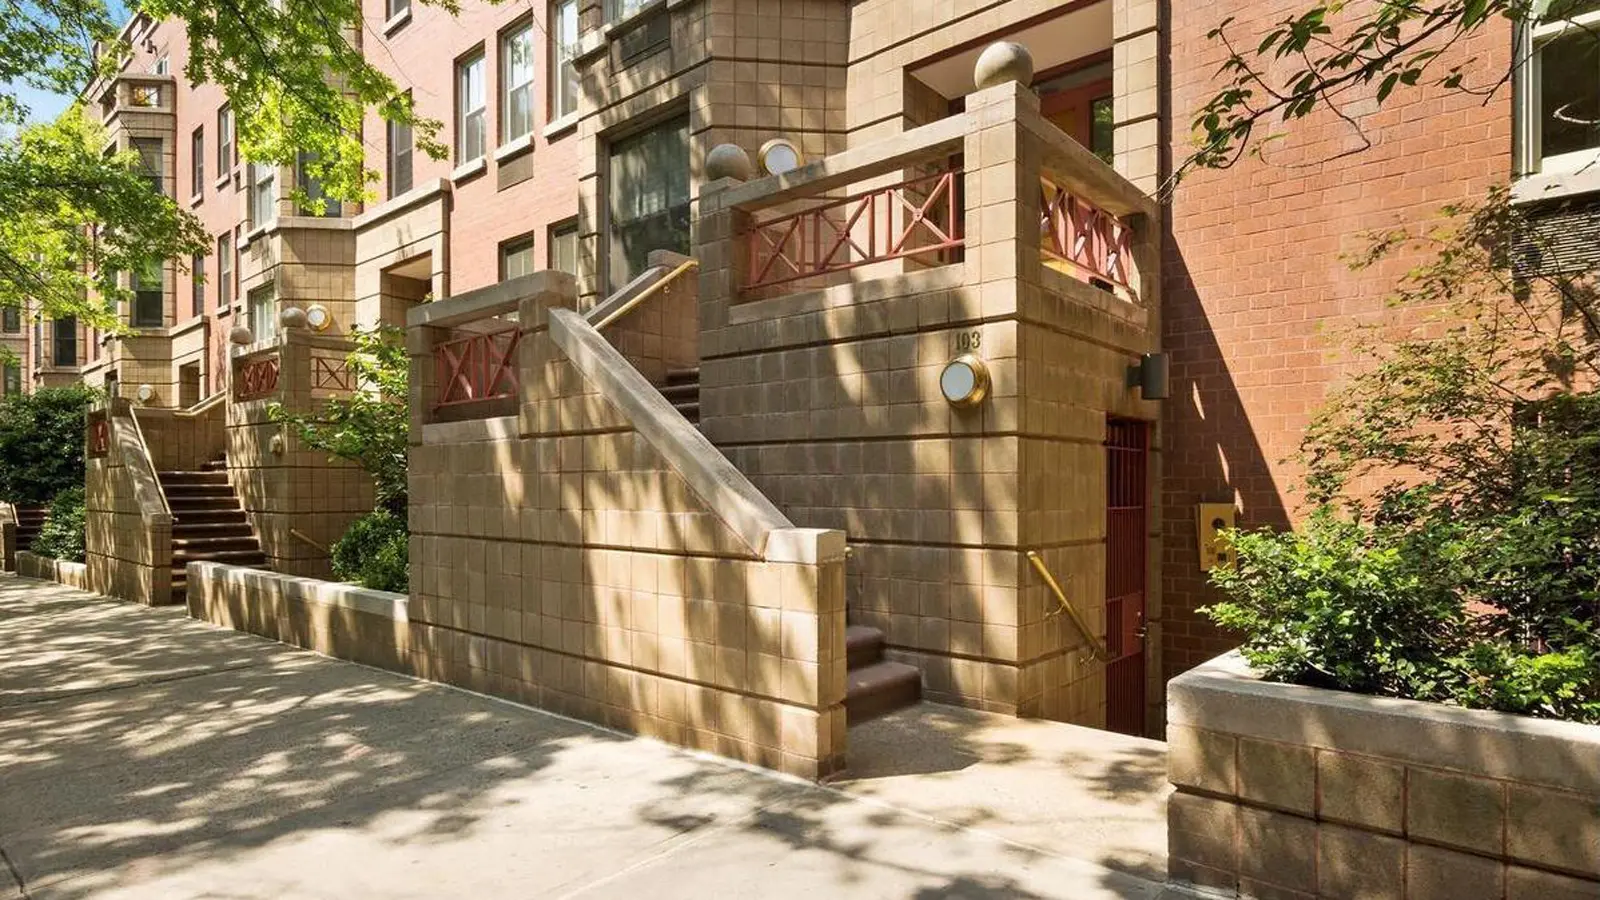 The Columbus Townhouses, 103 West 89th Street